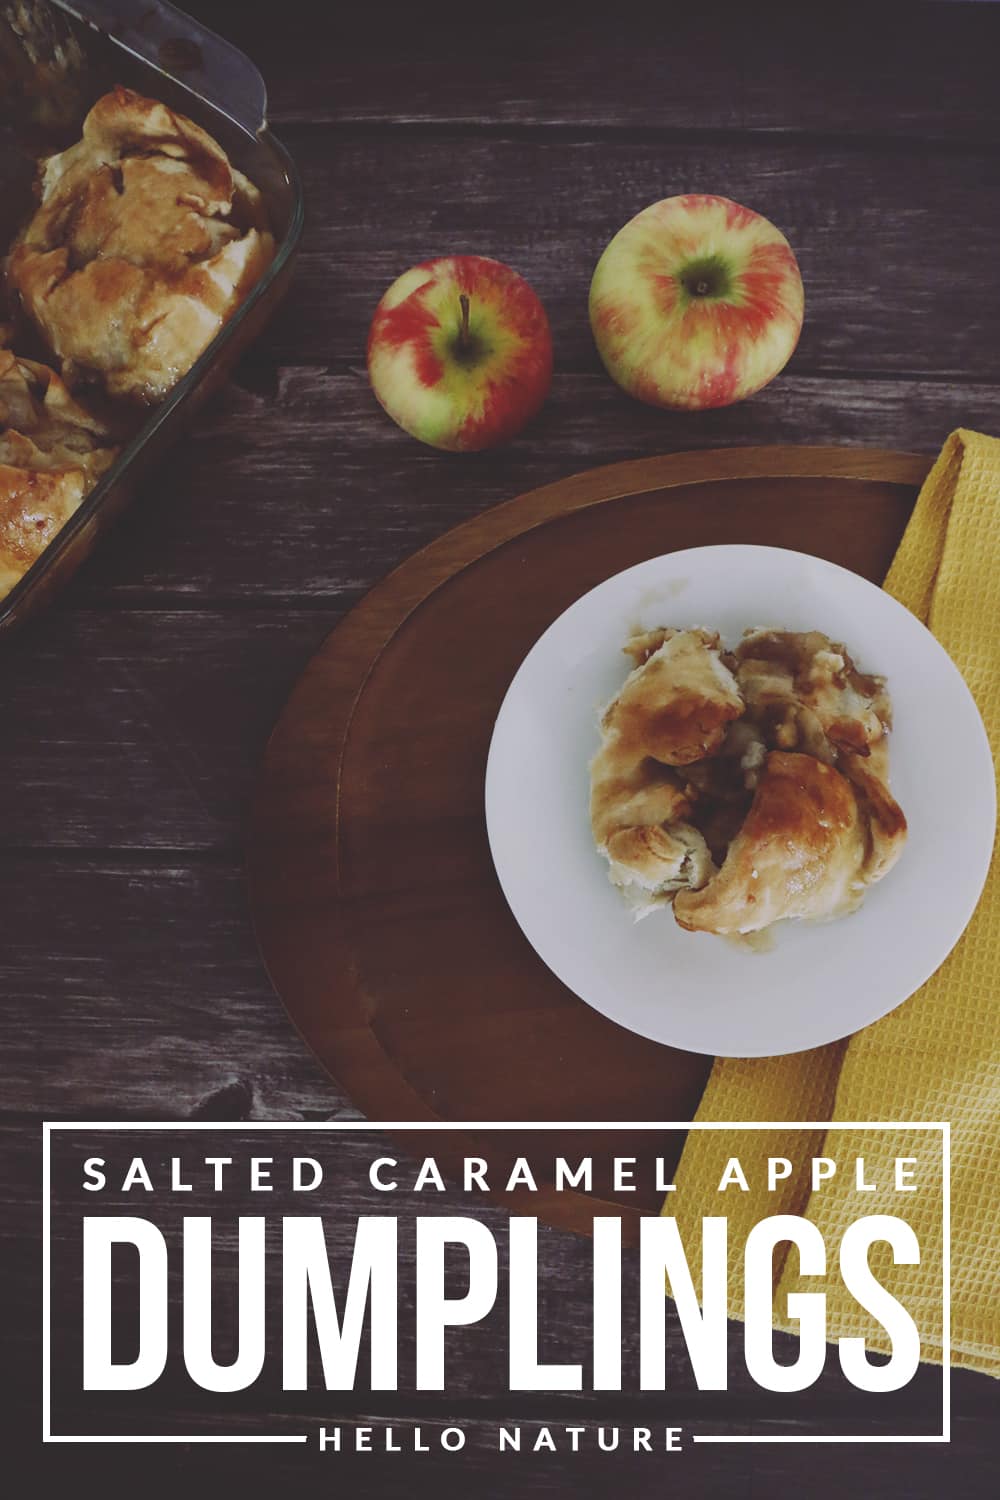 This warm and gooey salted caramel apple dumplings just screams comfort food on a crisp Autumn day. Perfect with ice cream or on it's own!